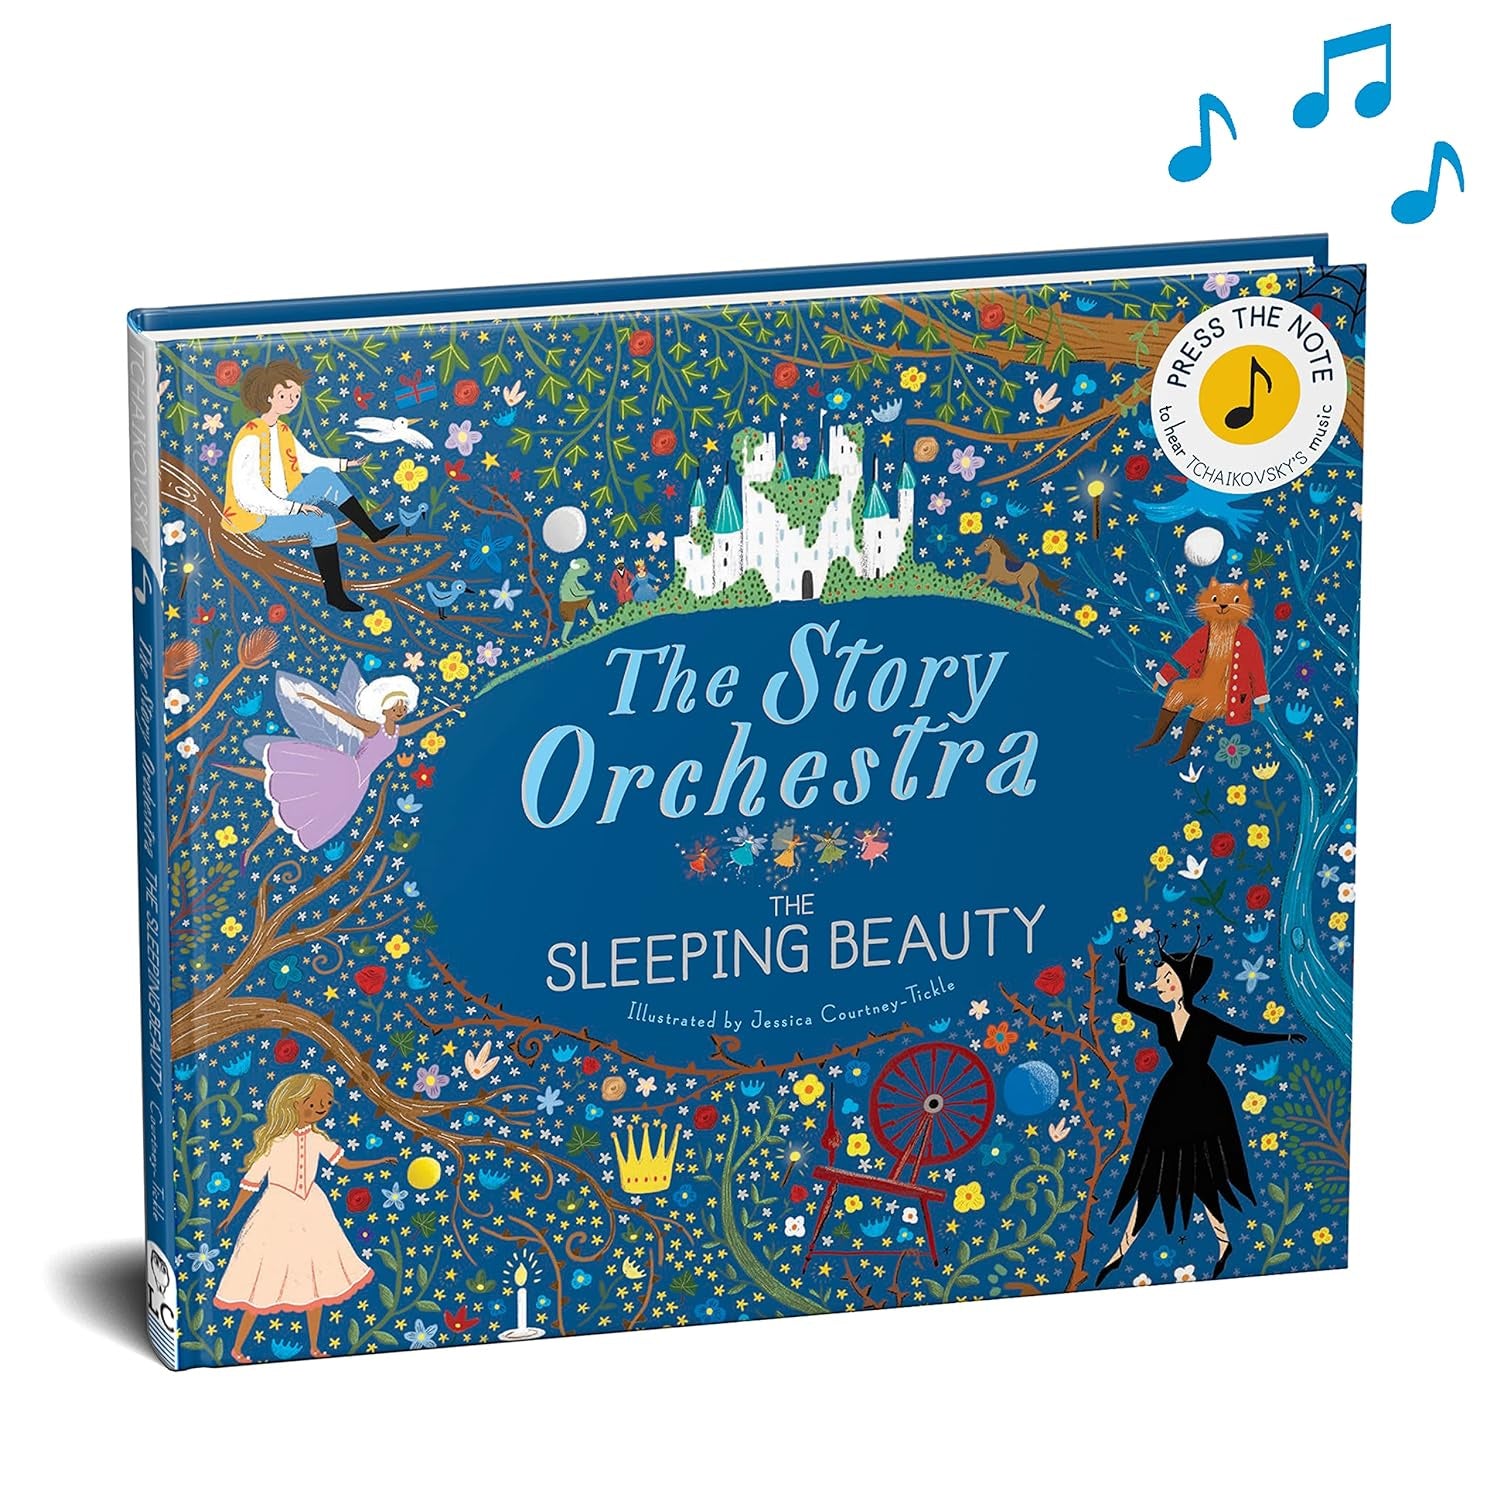 The Story Orchestra | Sleeping Beauty | Jessica Courtney -Tickle